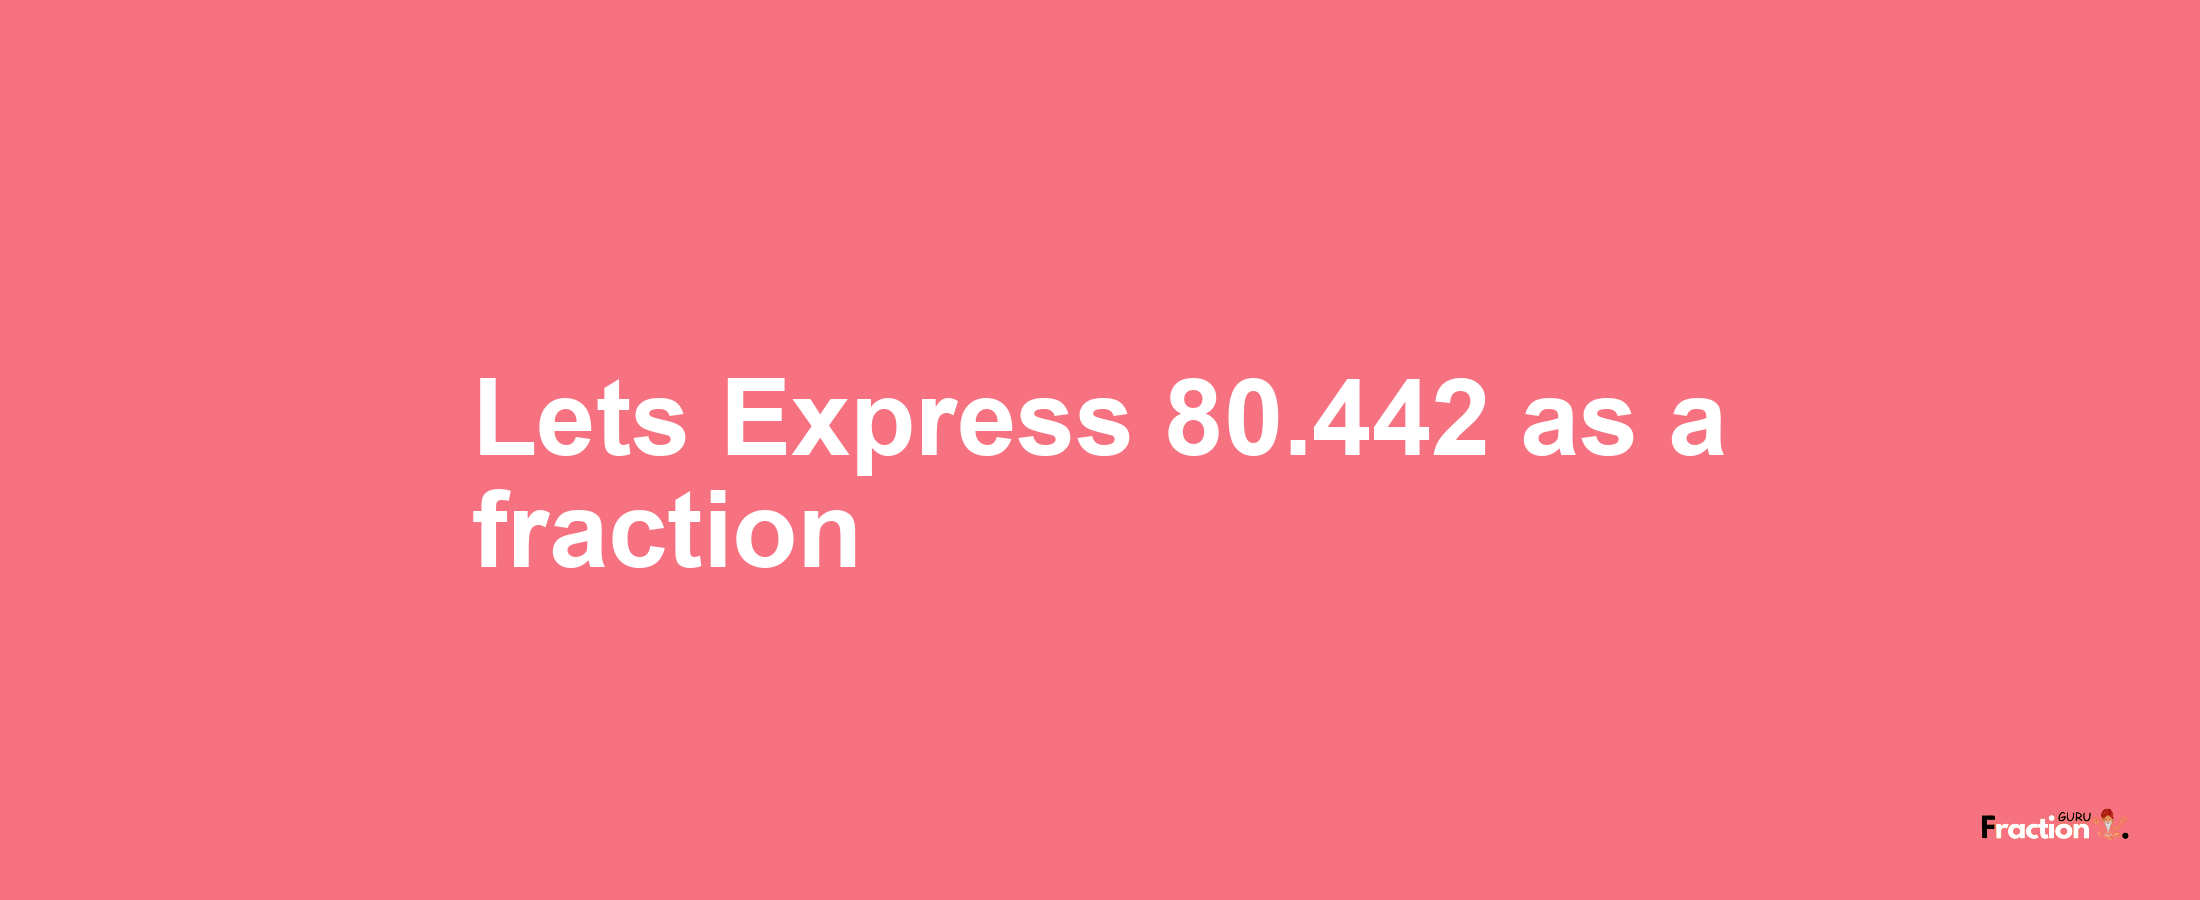 Lets Express 80.442 as afraction